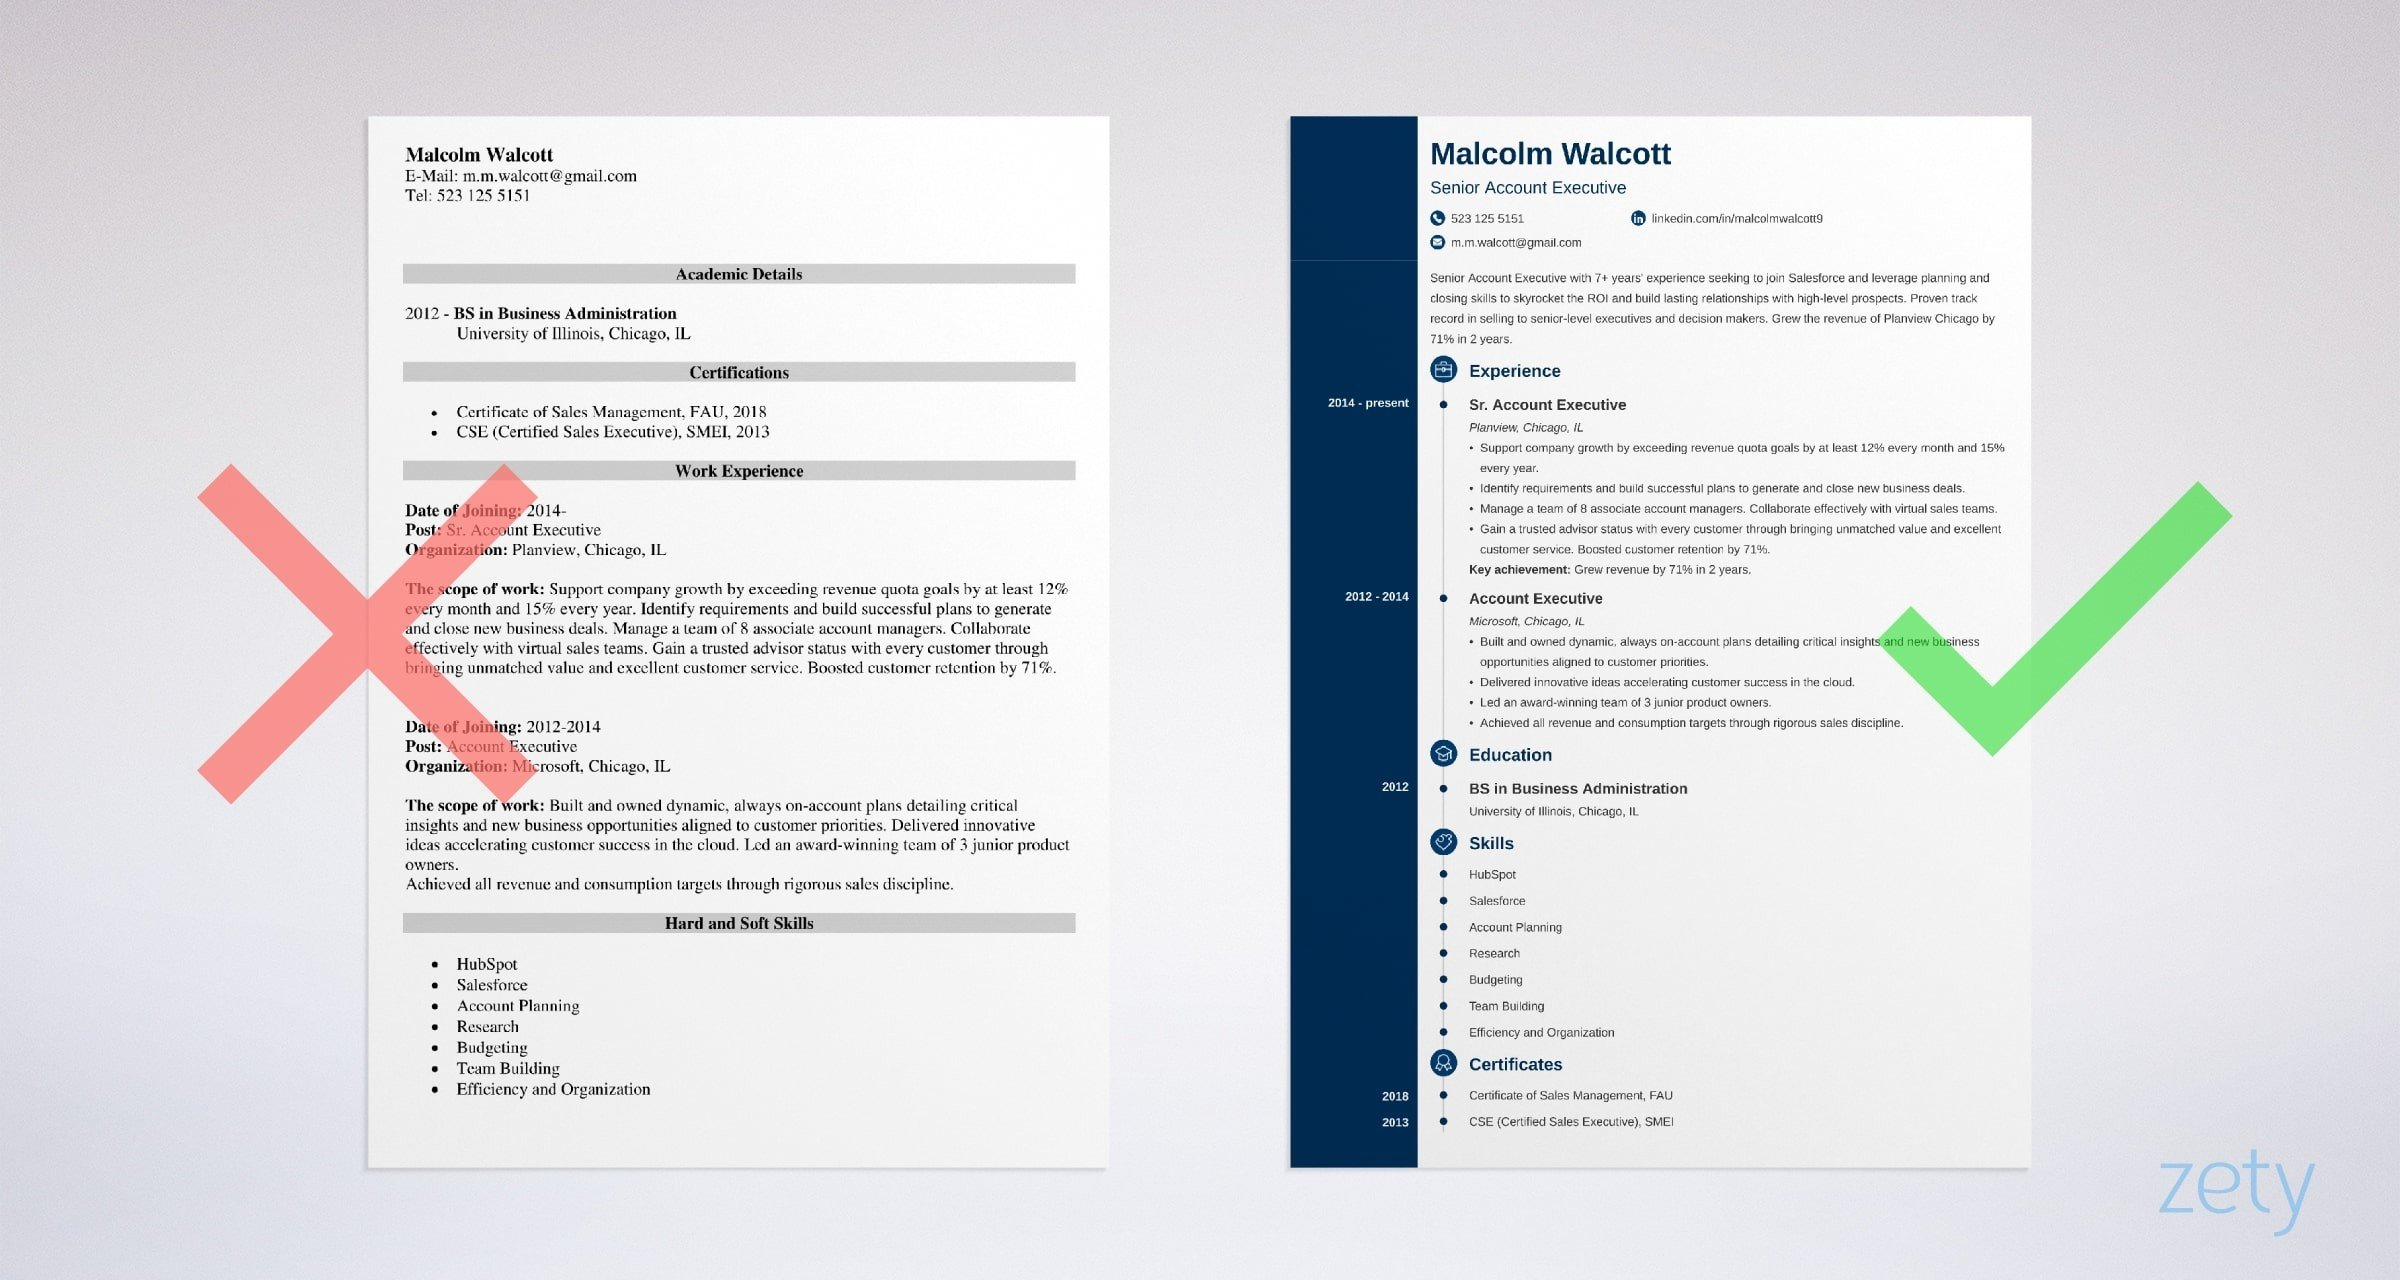 Account Executive Resume Sample Writing Guide 20 Tips within size 2400 X 1280